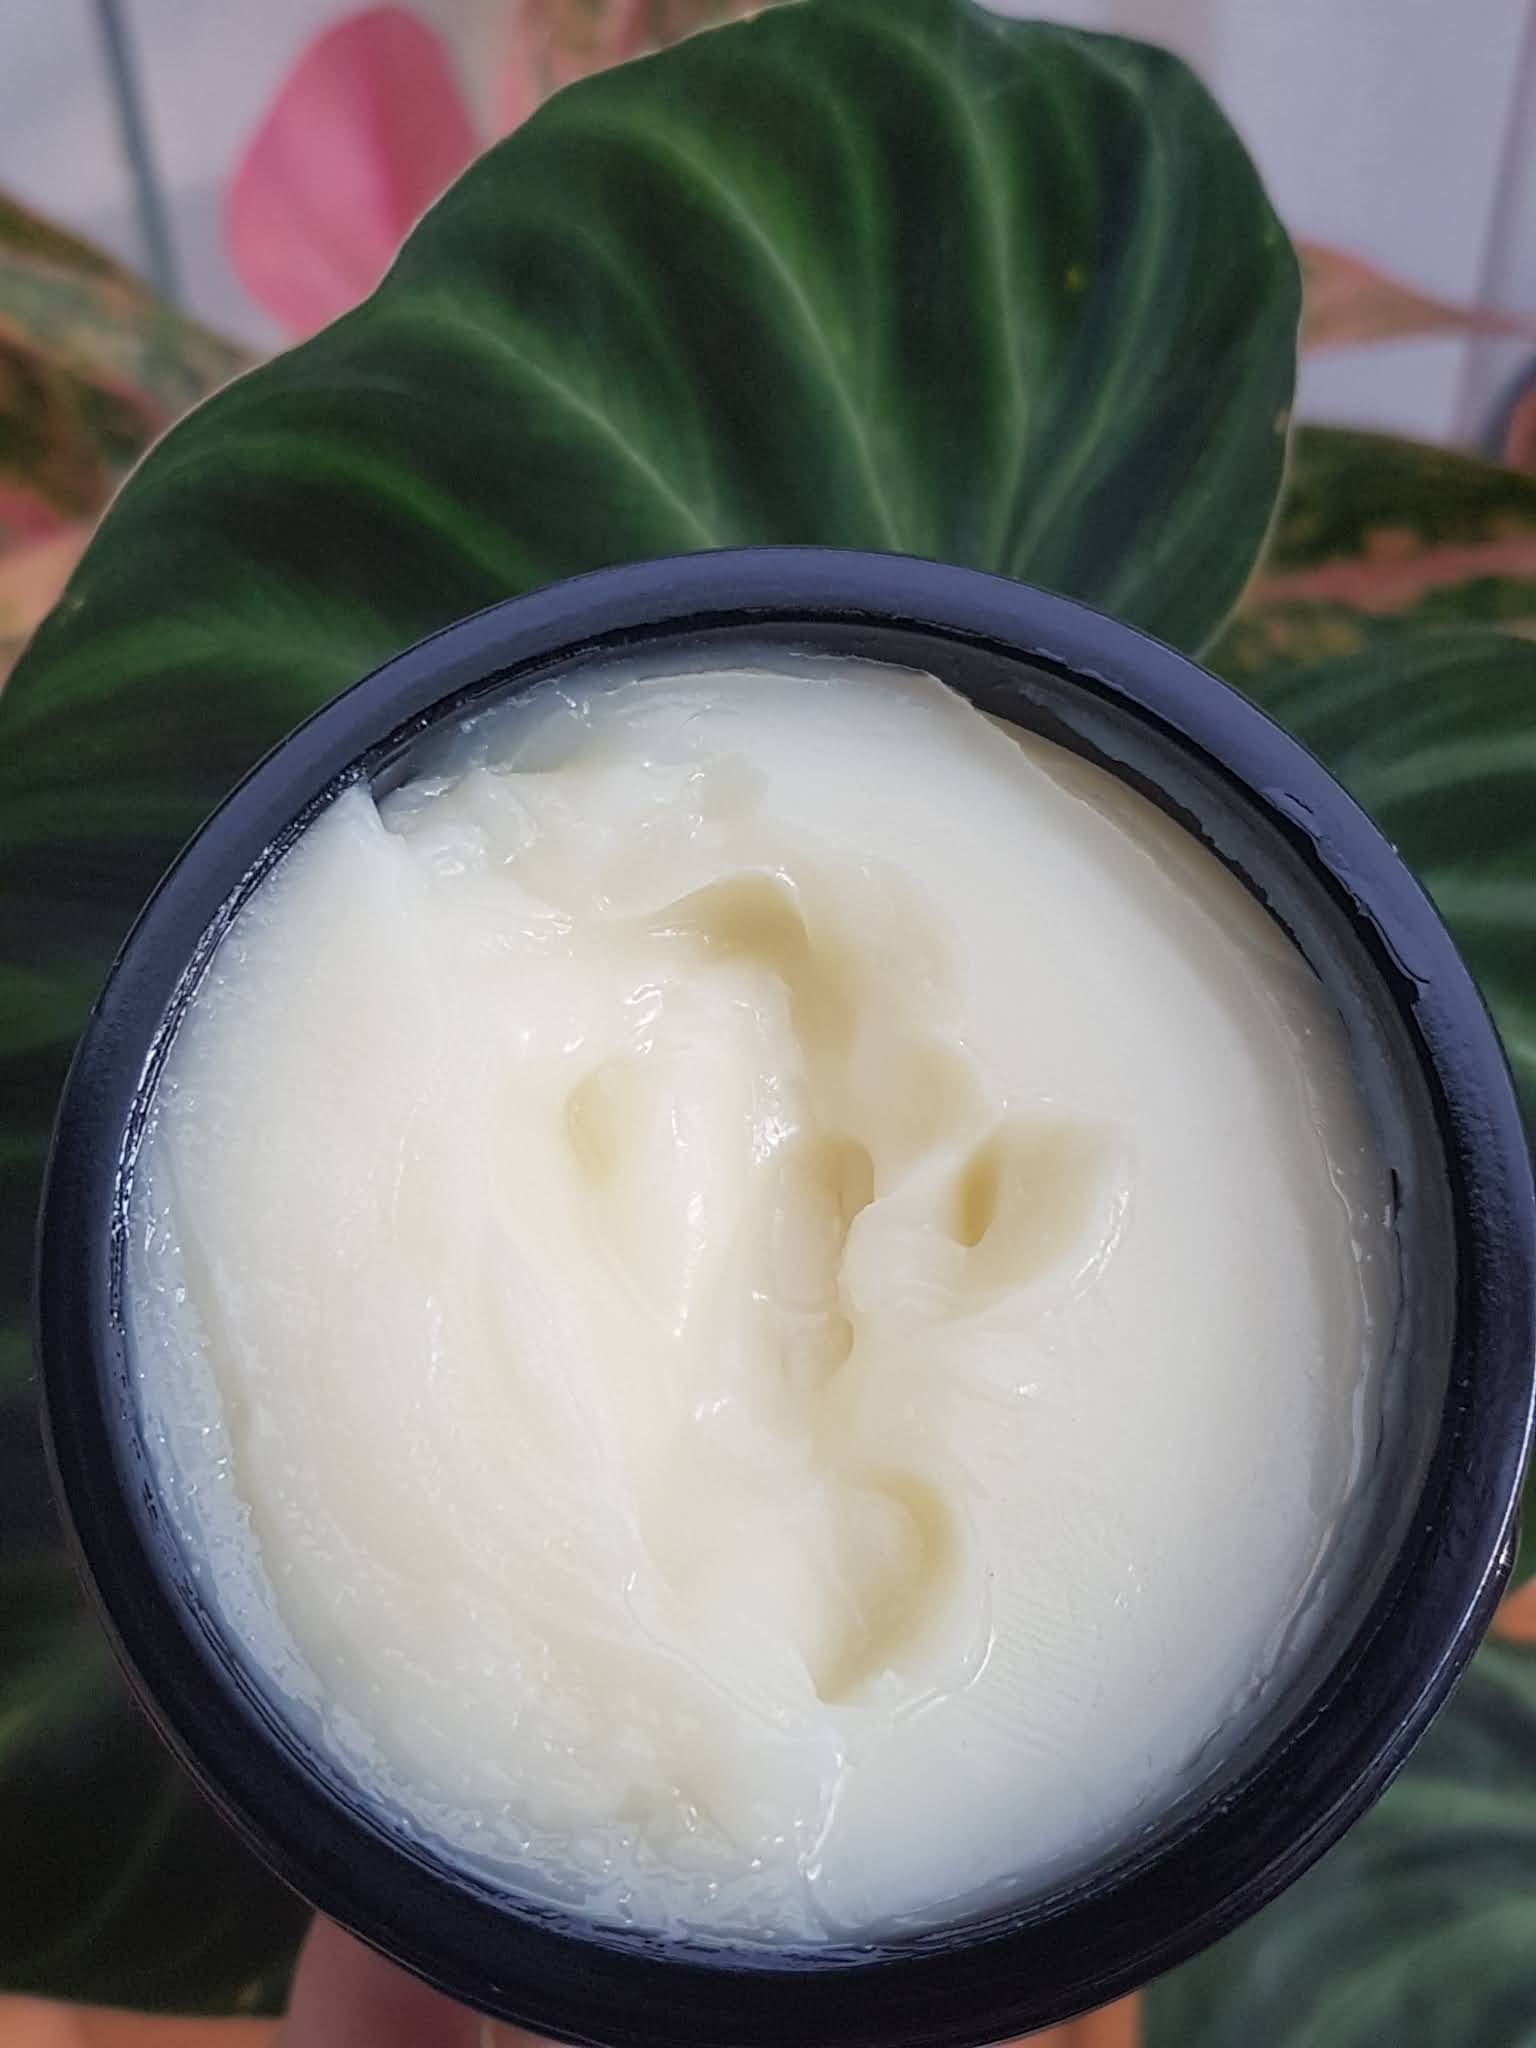 Meadow Skincare light creamy yellow body balm with a silky soft texture